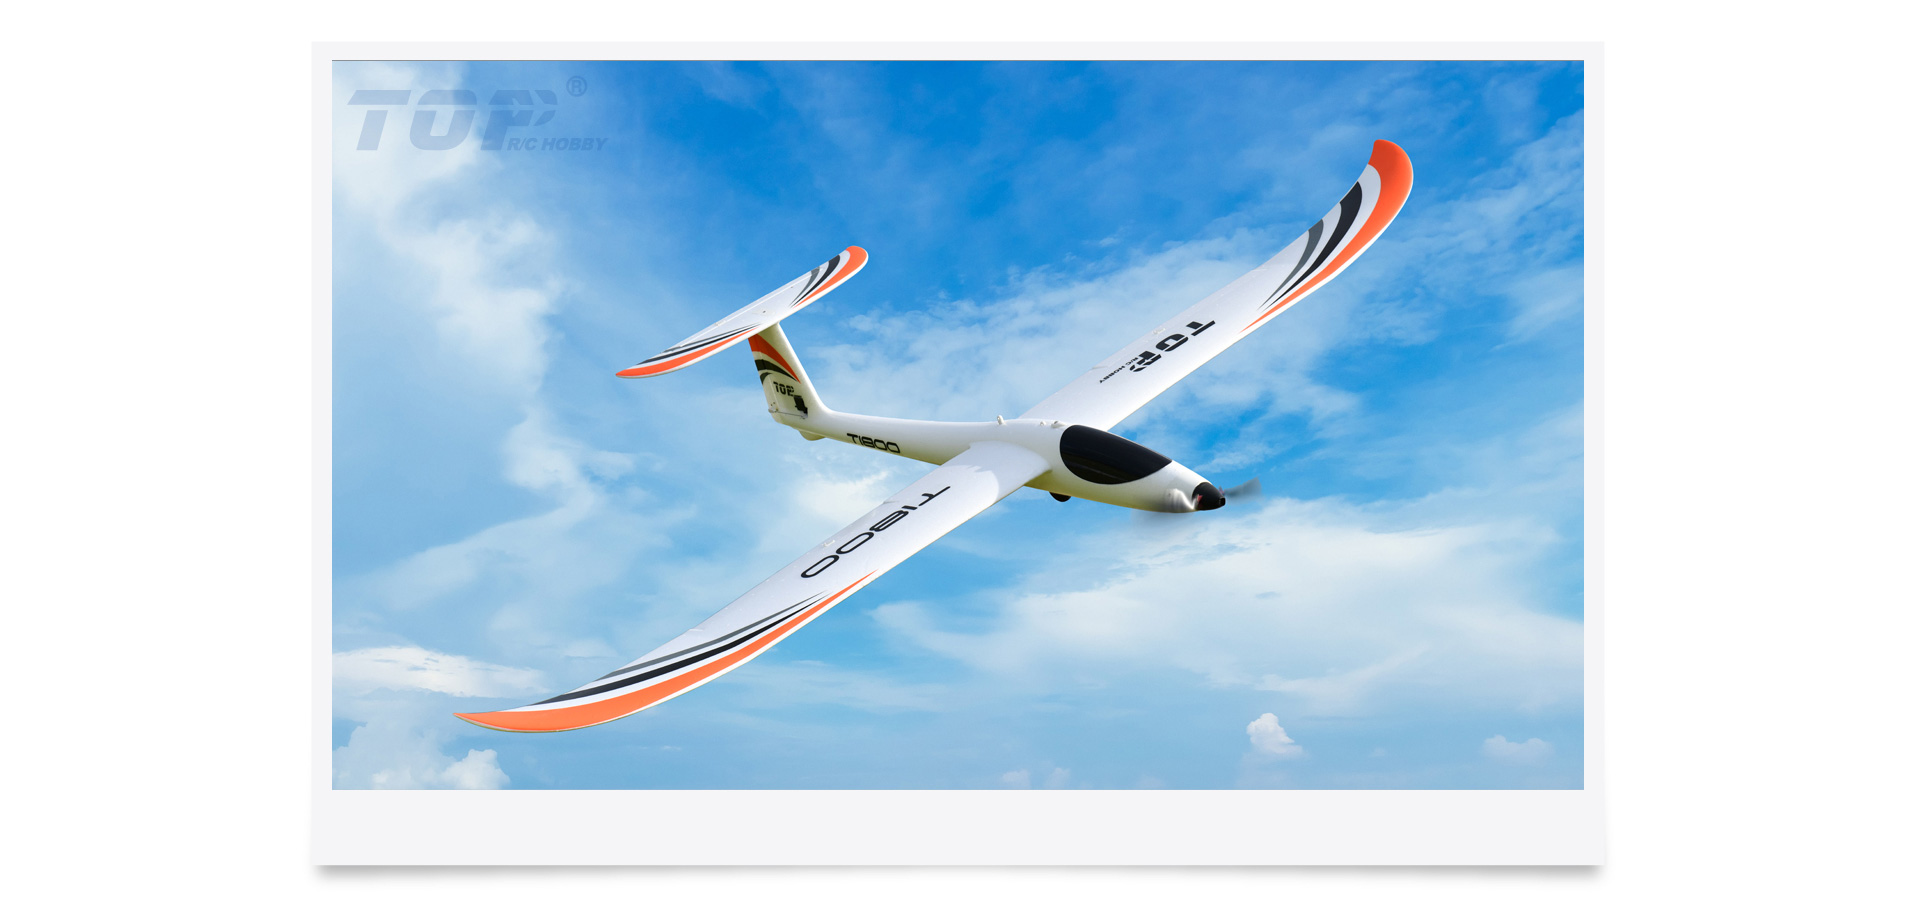 TOP RC HOBBY 1800MM T1800 GLIDER